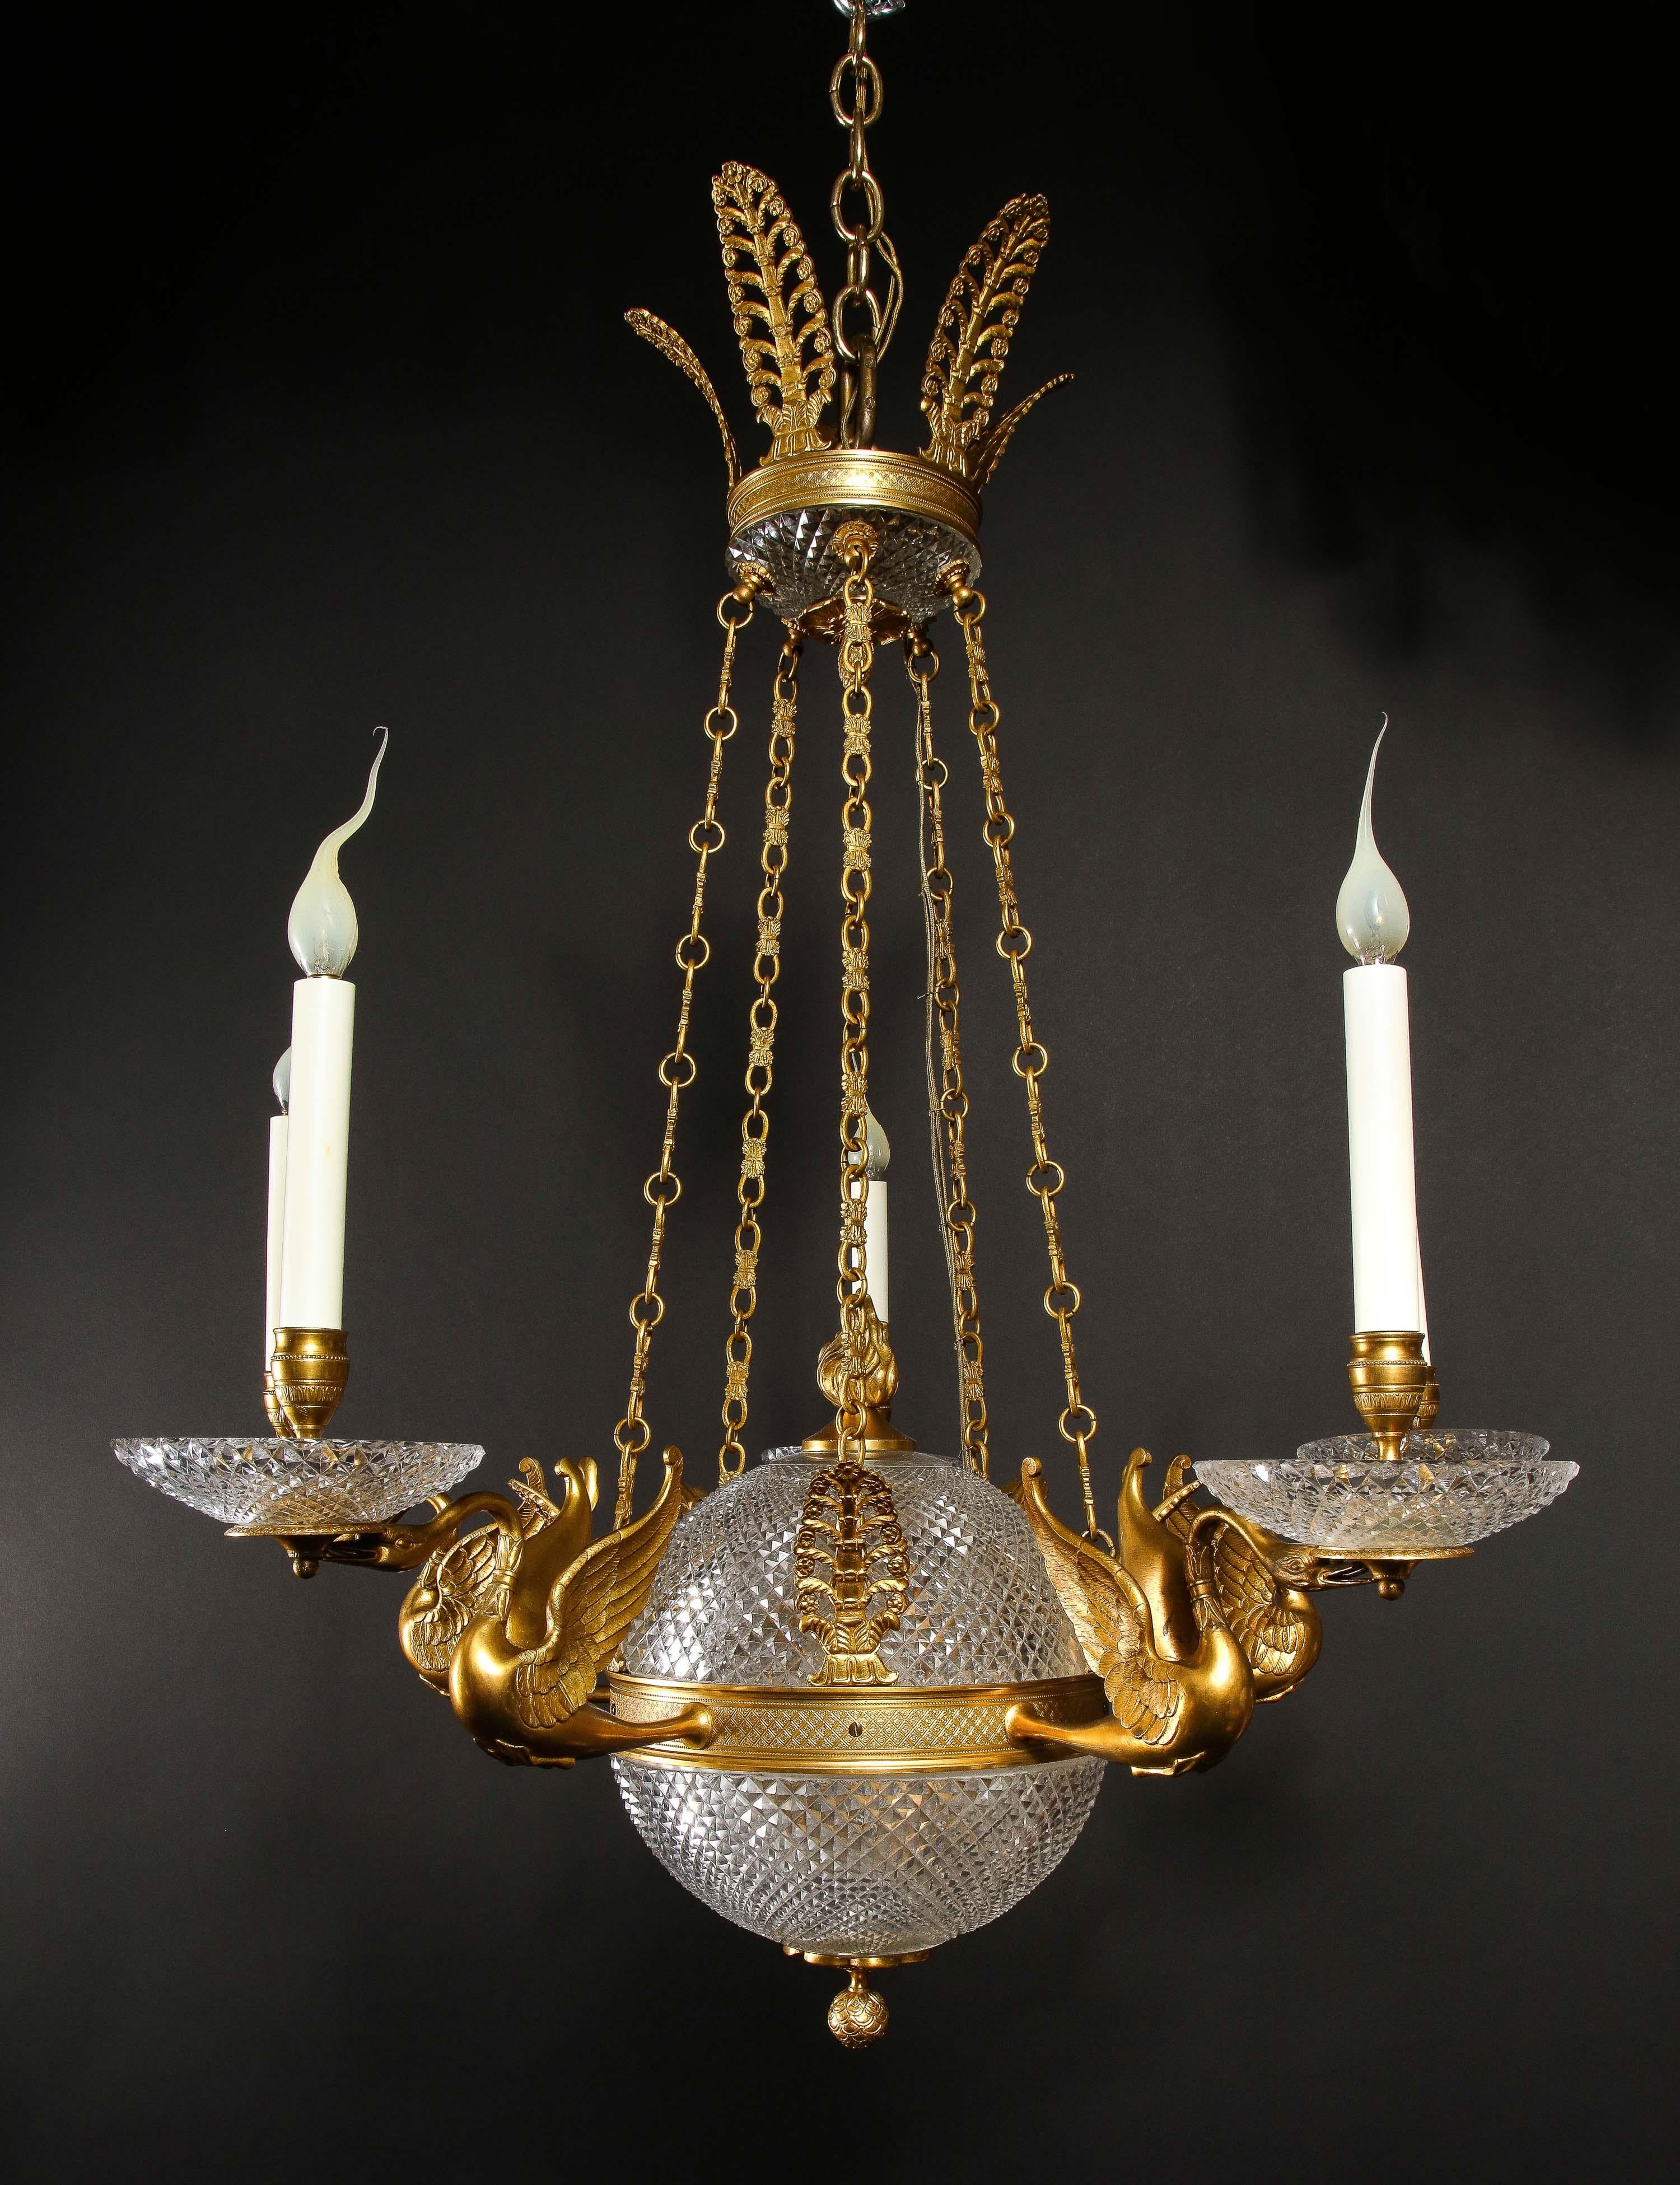 Hollywood Regency Antique French Ball Form Gilt Bronze and Crystal Chandelier For Sale 3